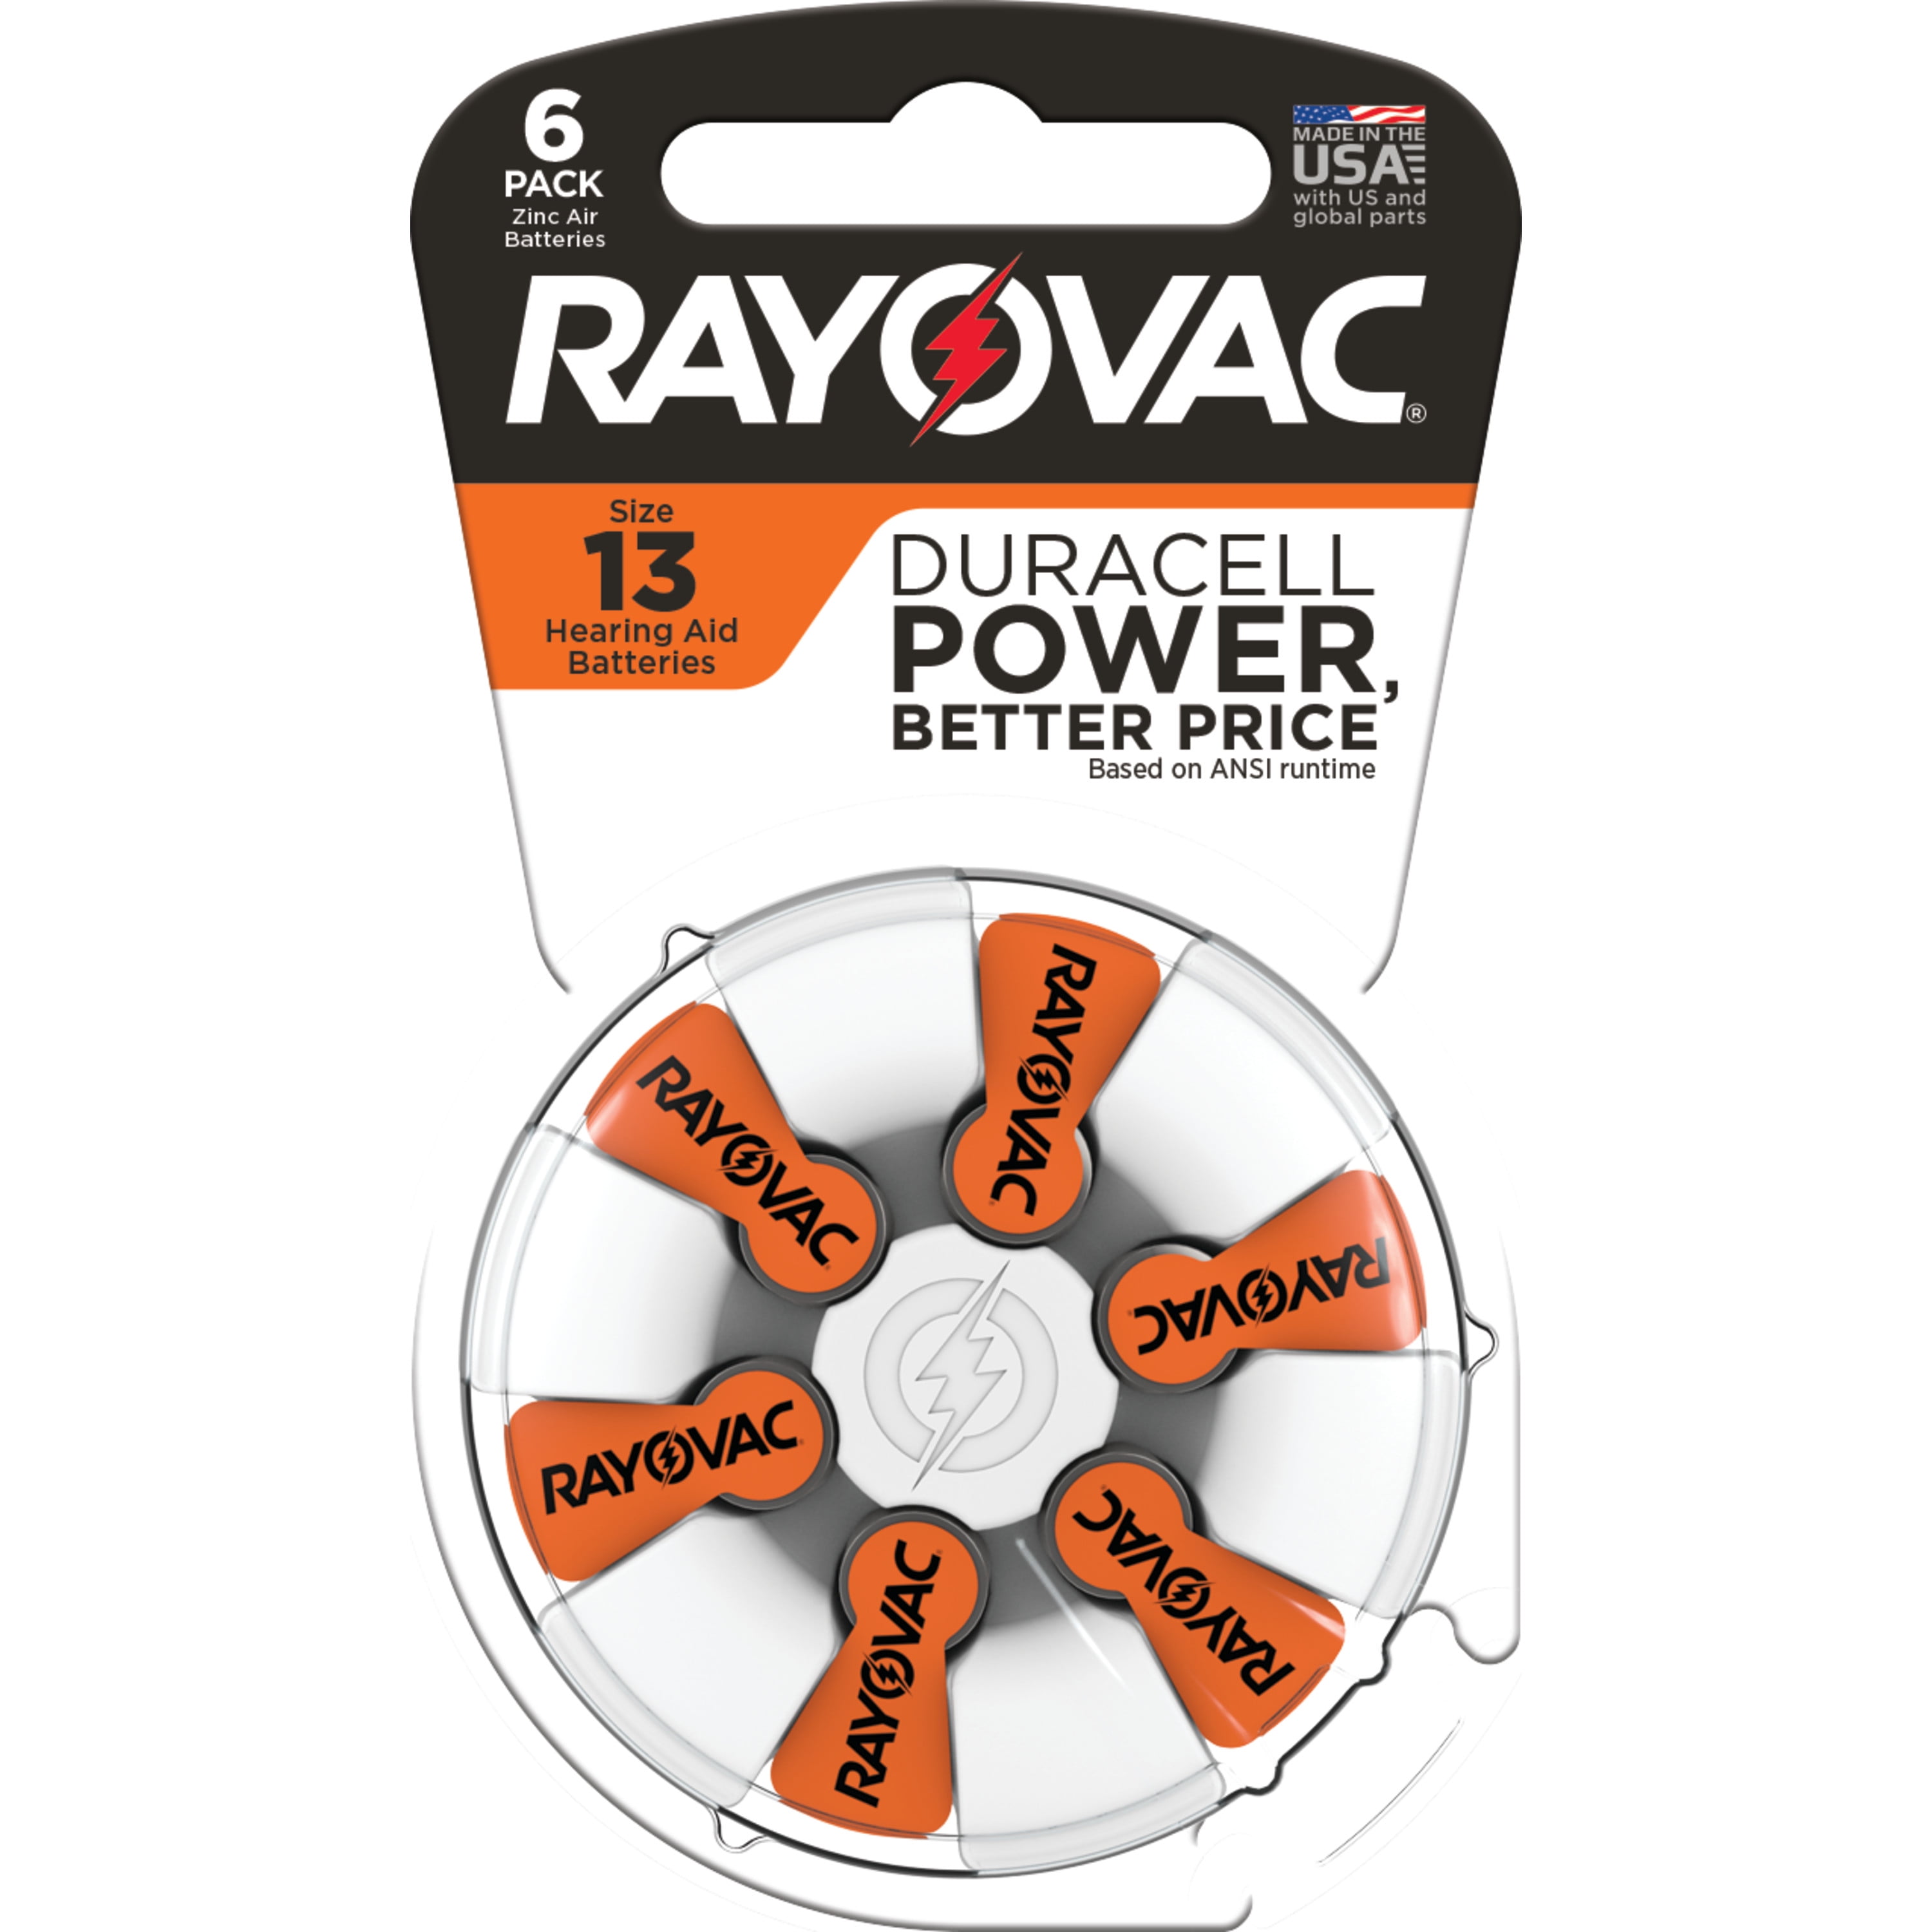 Rayovac Size 13 Hearing Aid Batteries (6 Pack), Size 13 Batteries